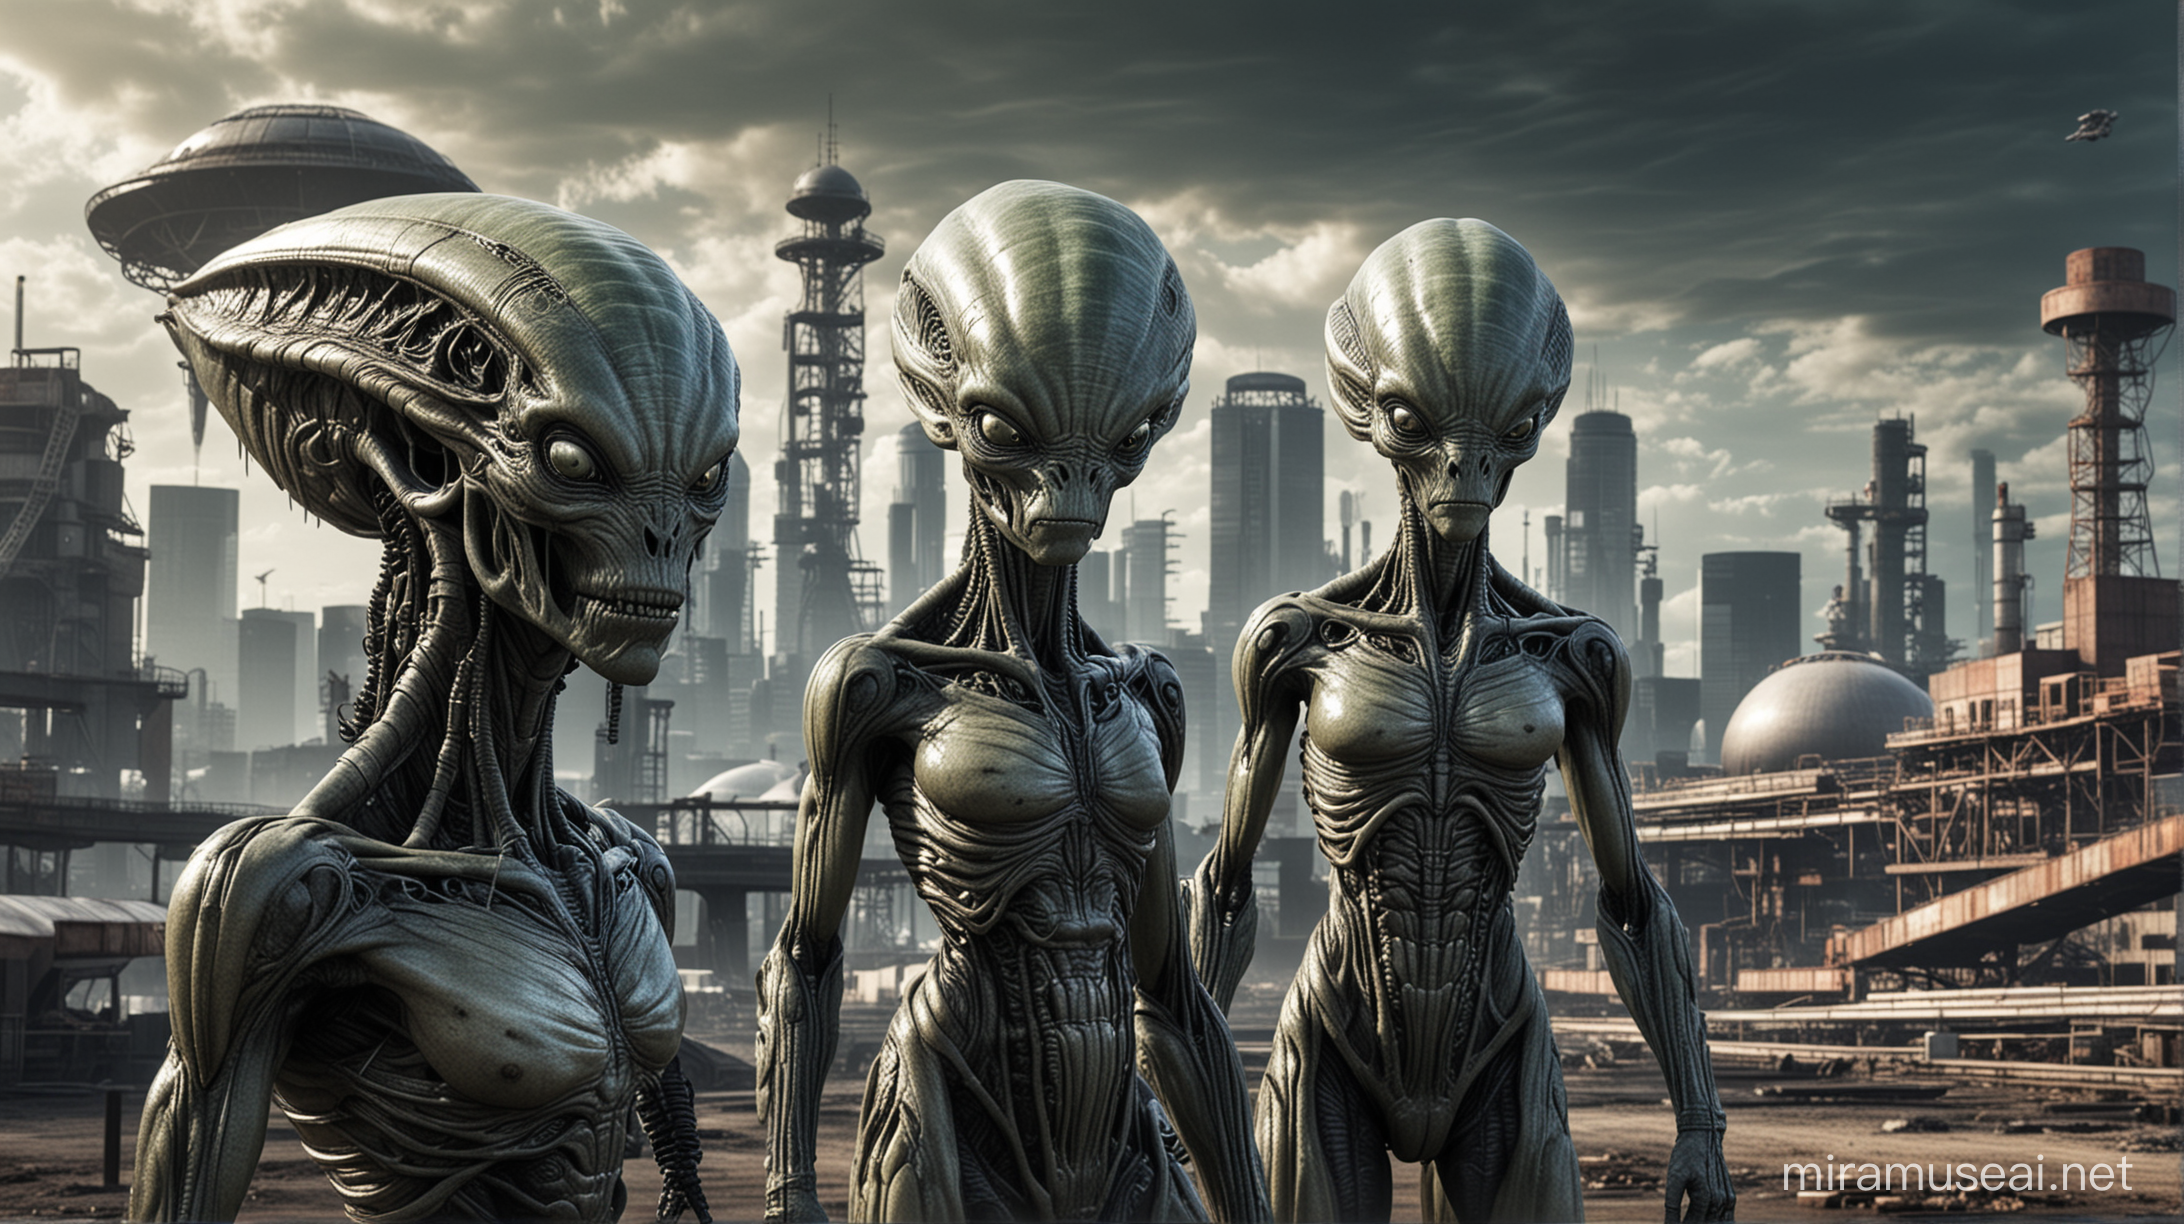 Image of Aliens with beautiful industrial background.